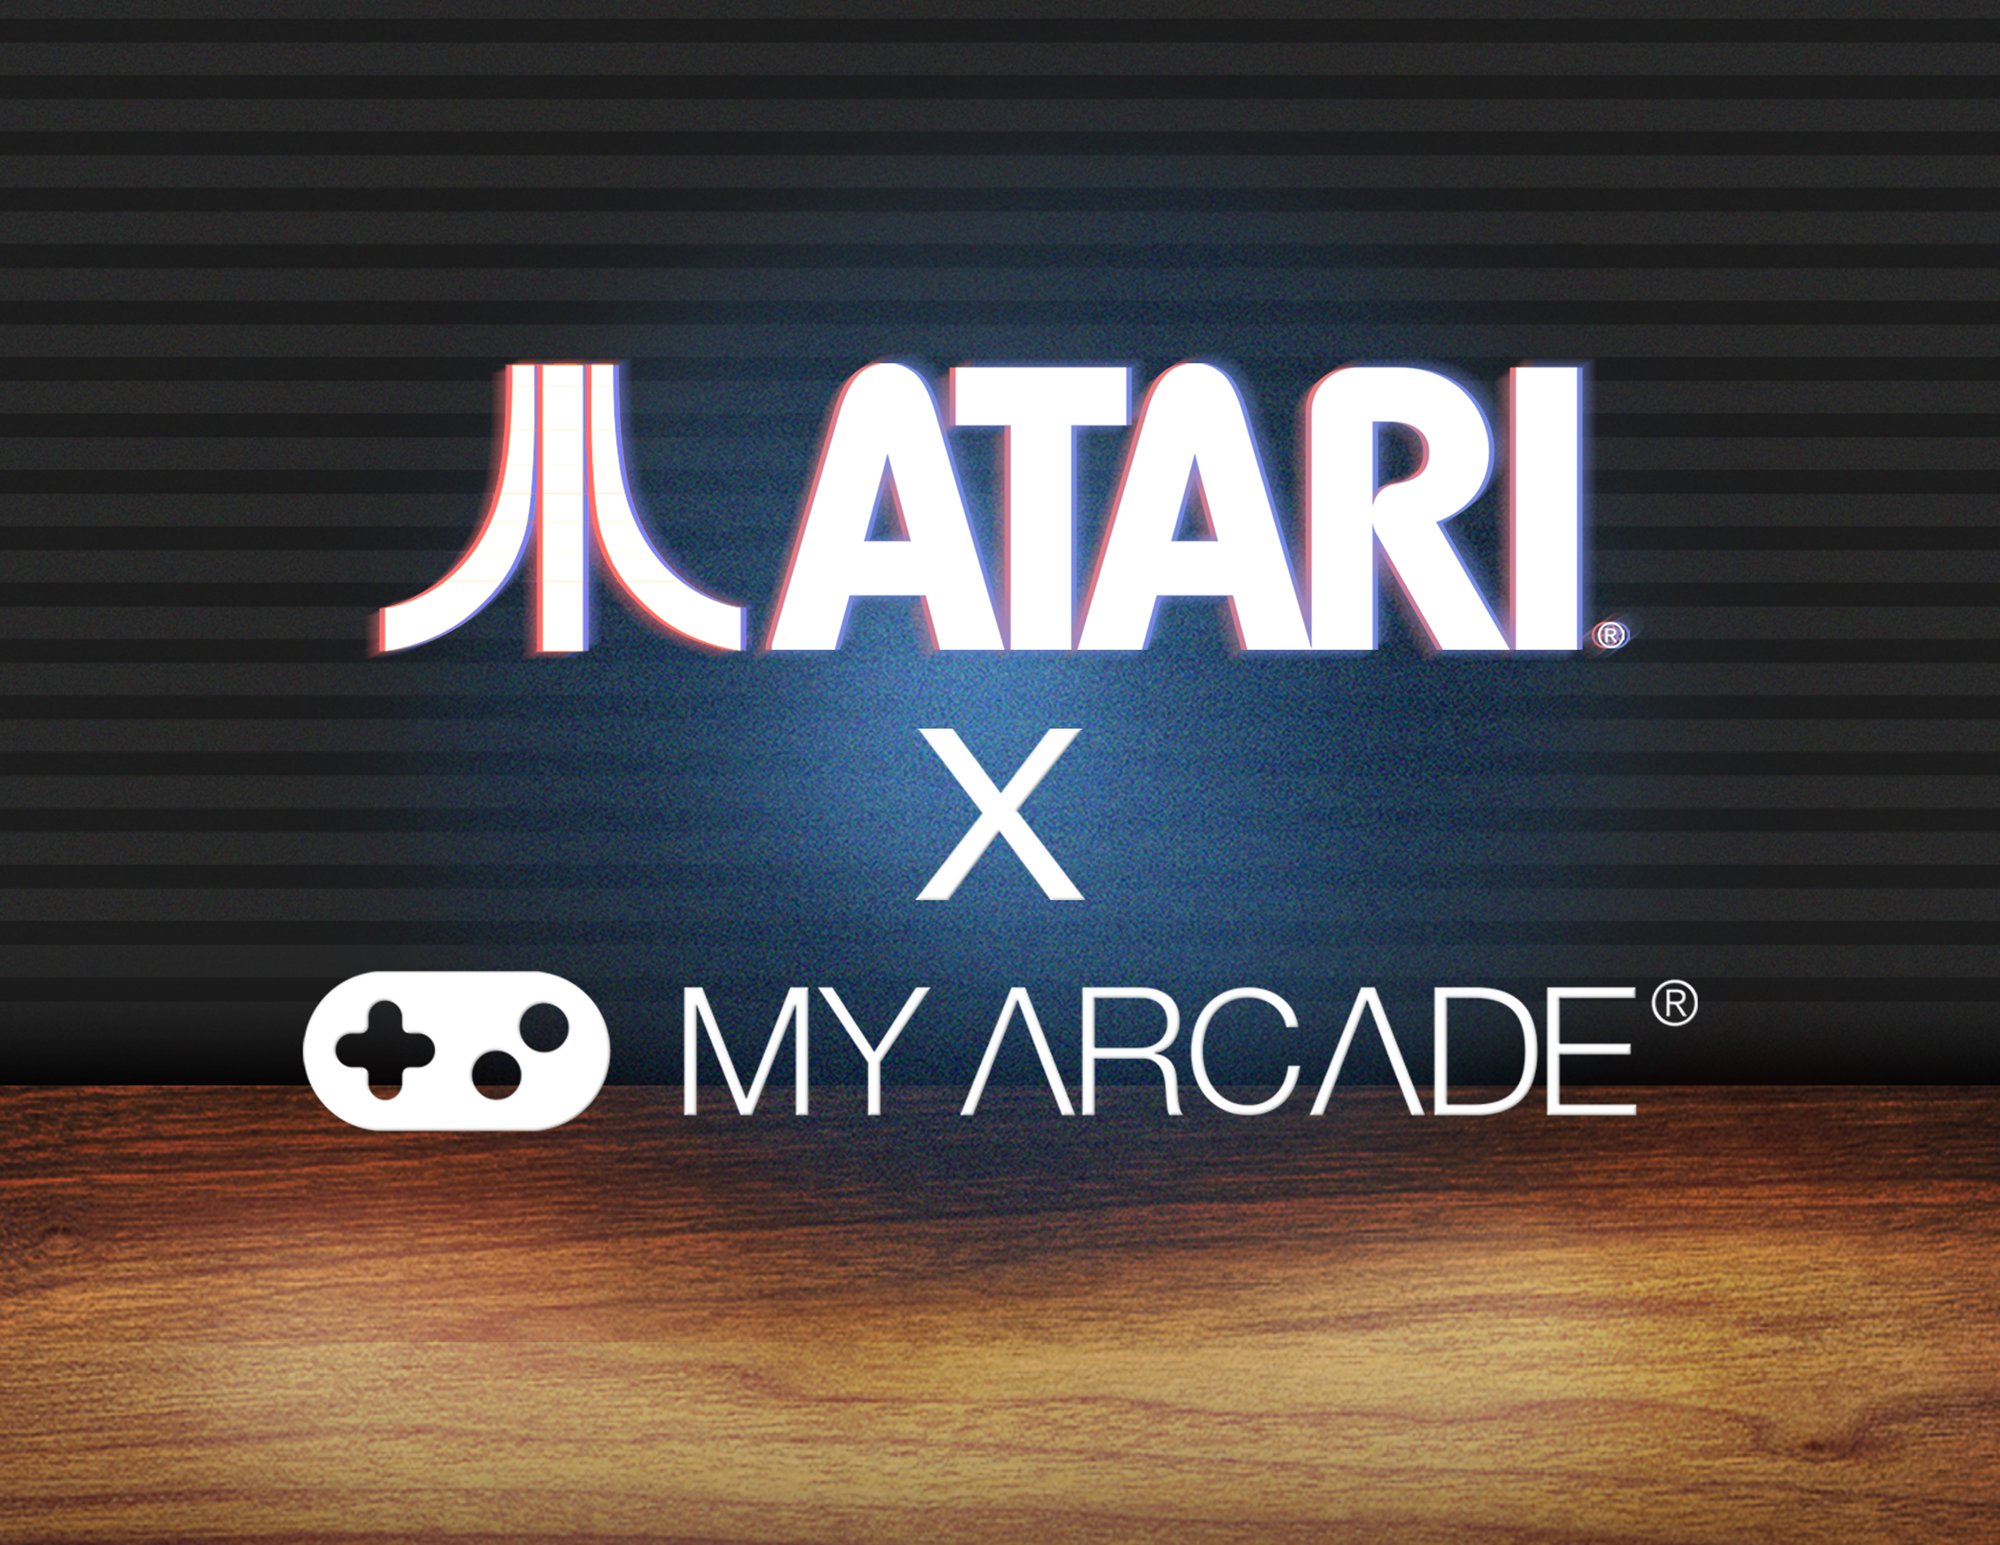 CES 2023: MyArcade Teams Up With Atari For 3 New Devices